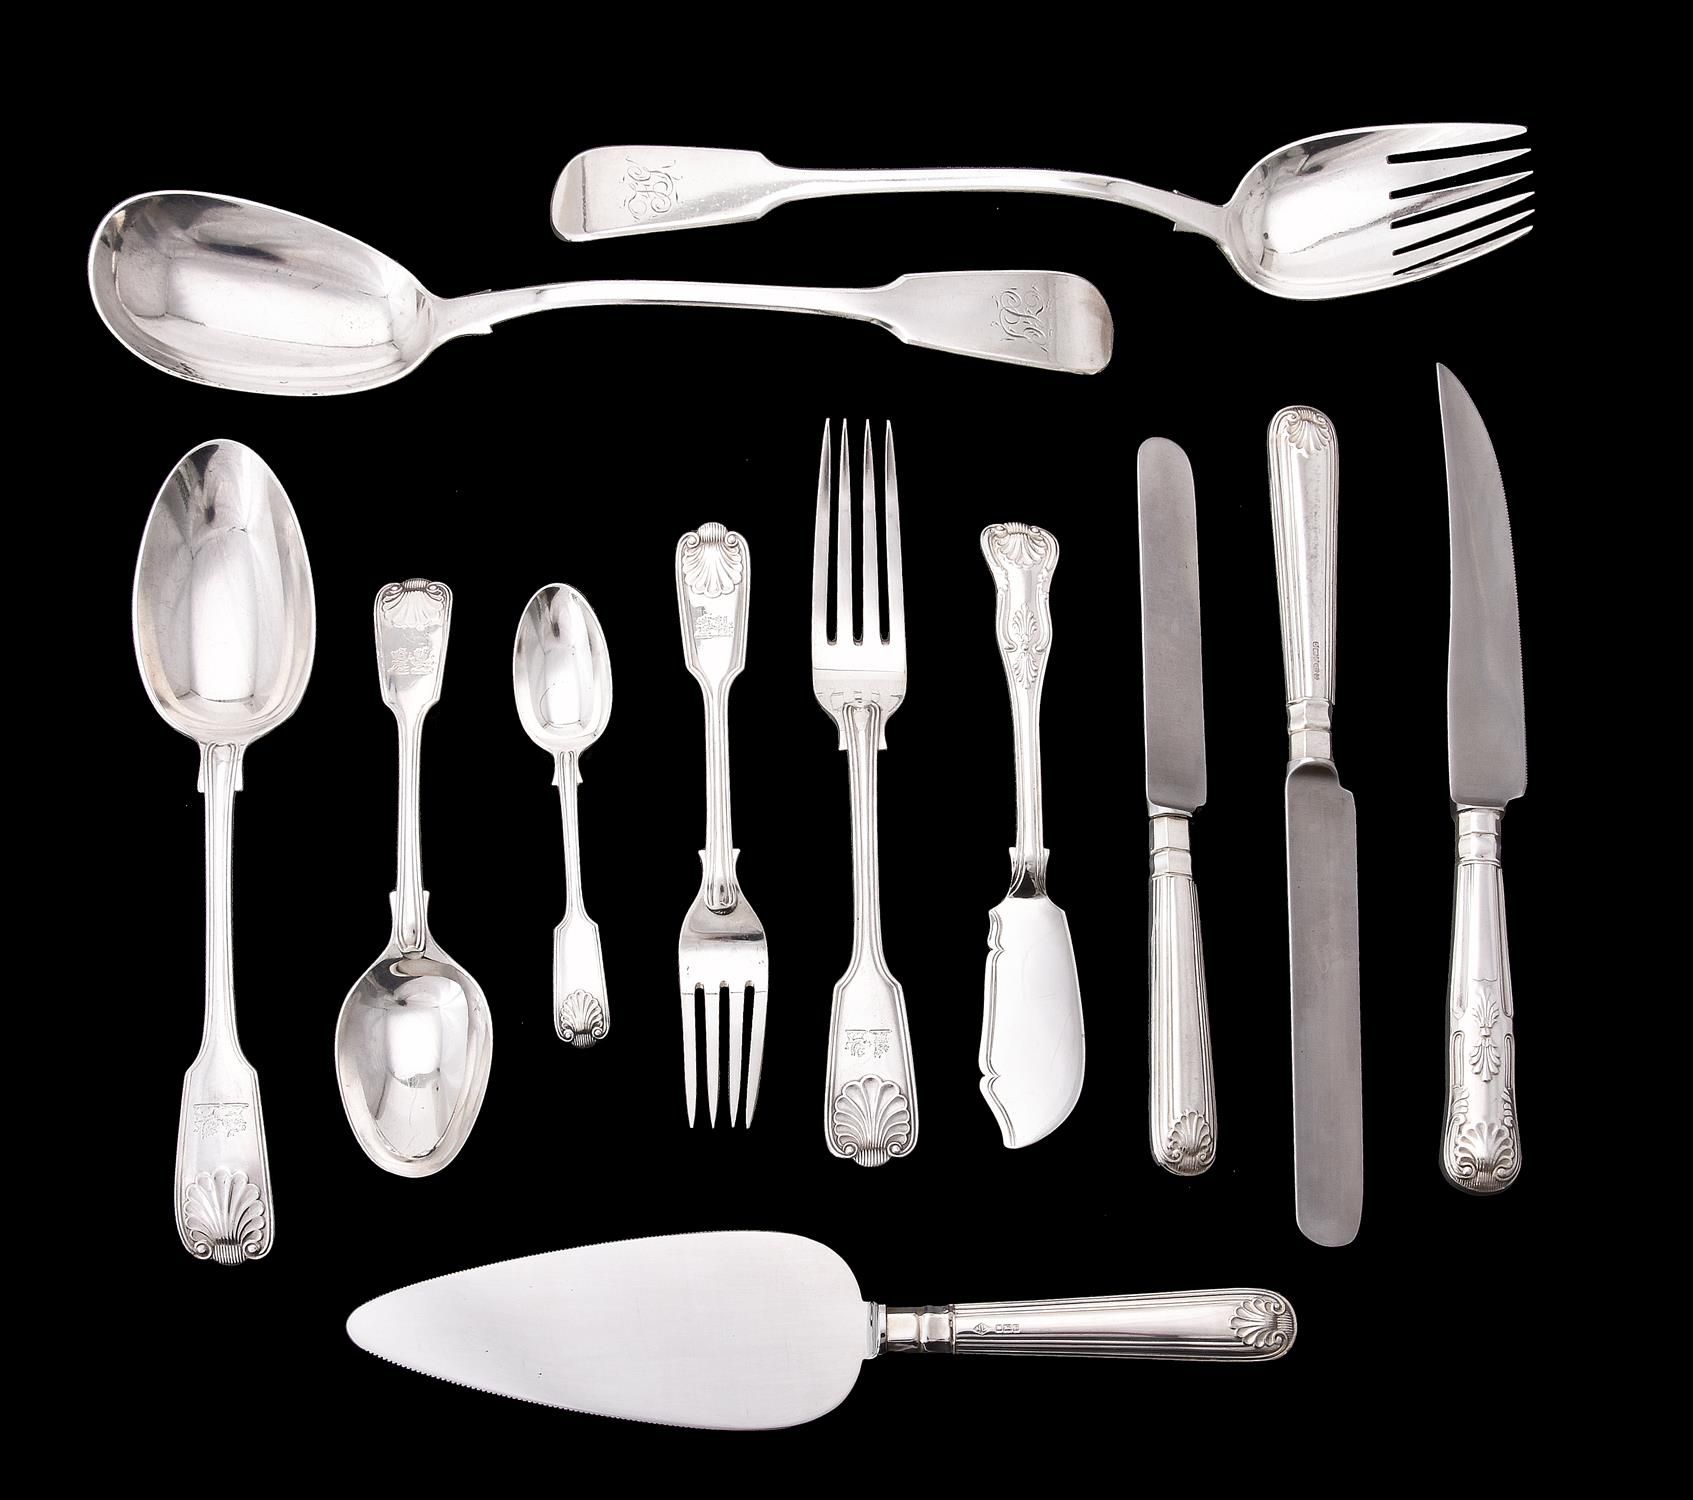 A collection of silver fiddle, shell and thread pattern flatware Eine Sammlung v&hellip;